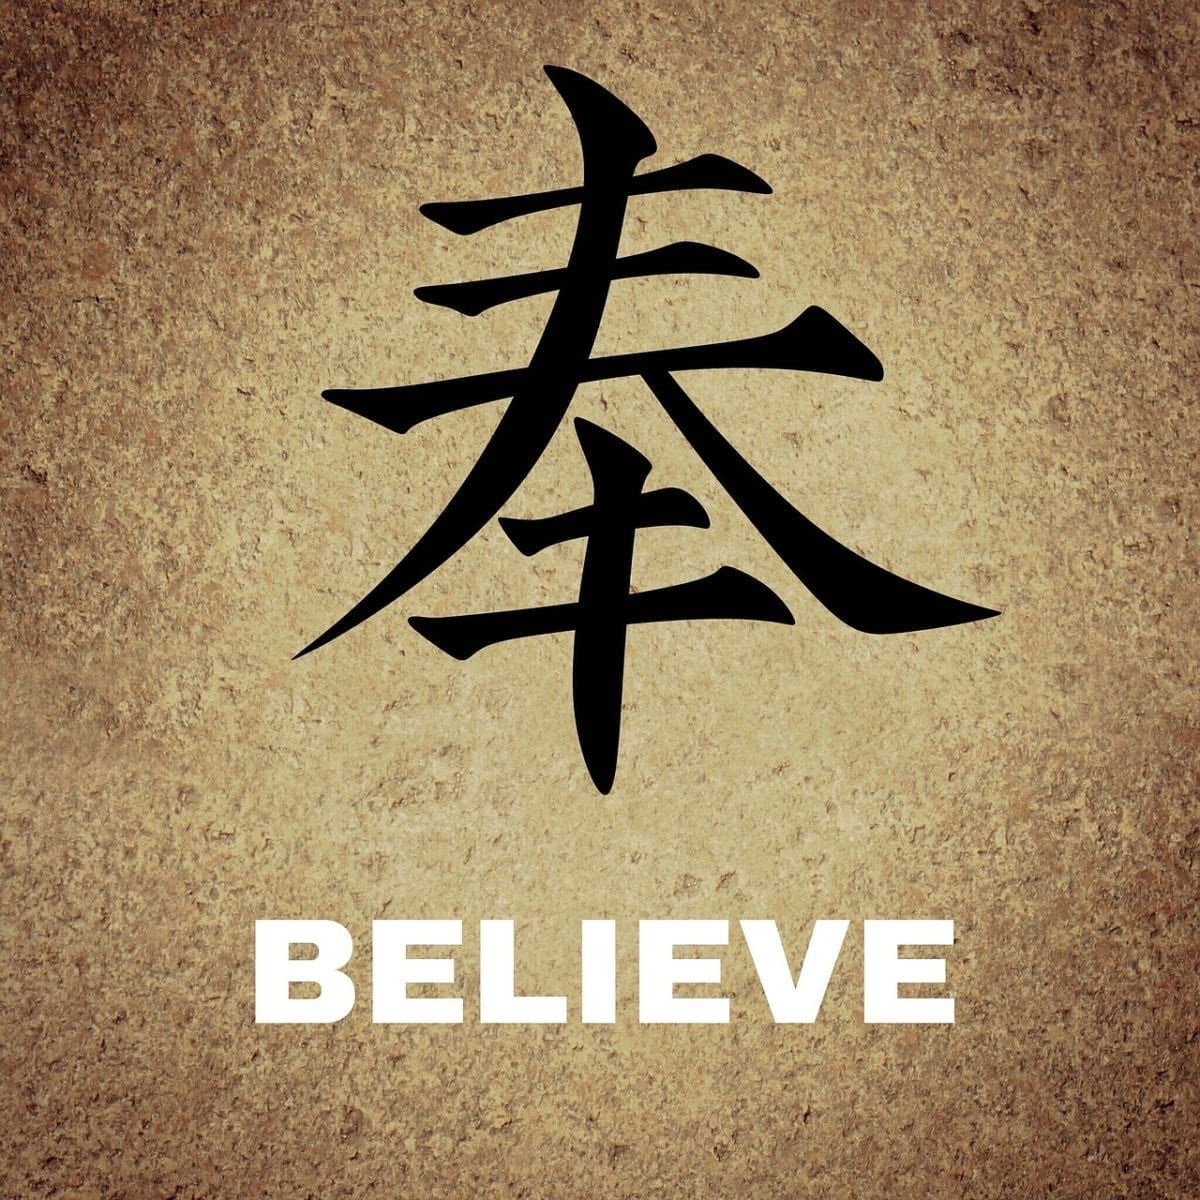 Image of the word believe